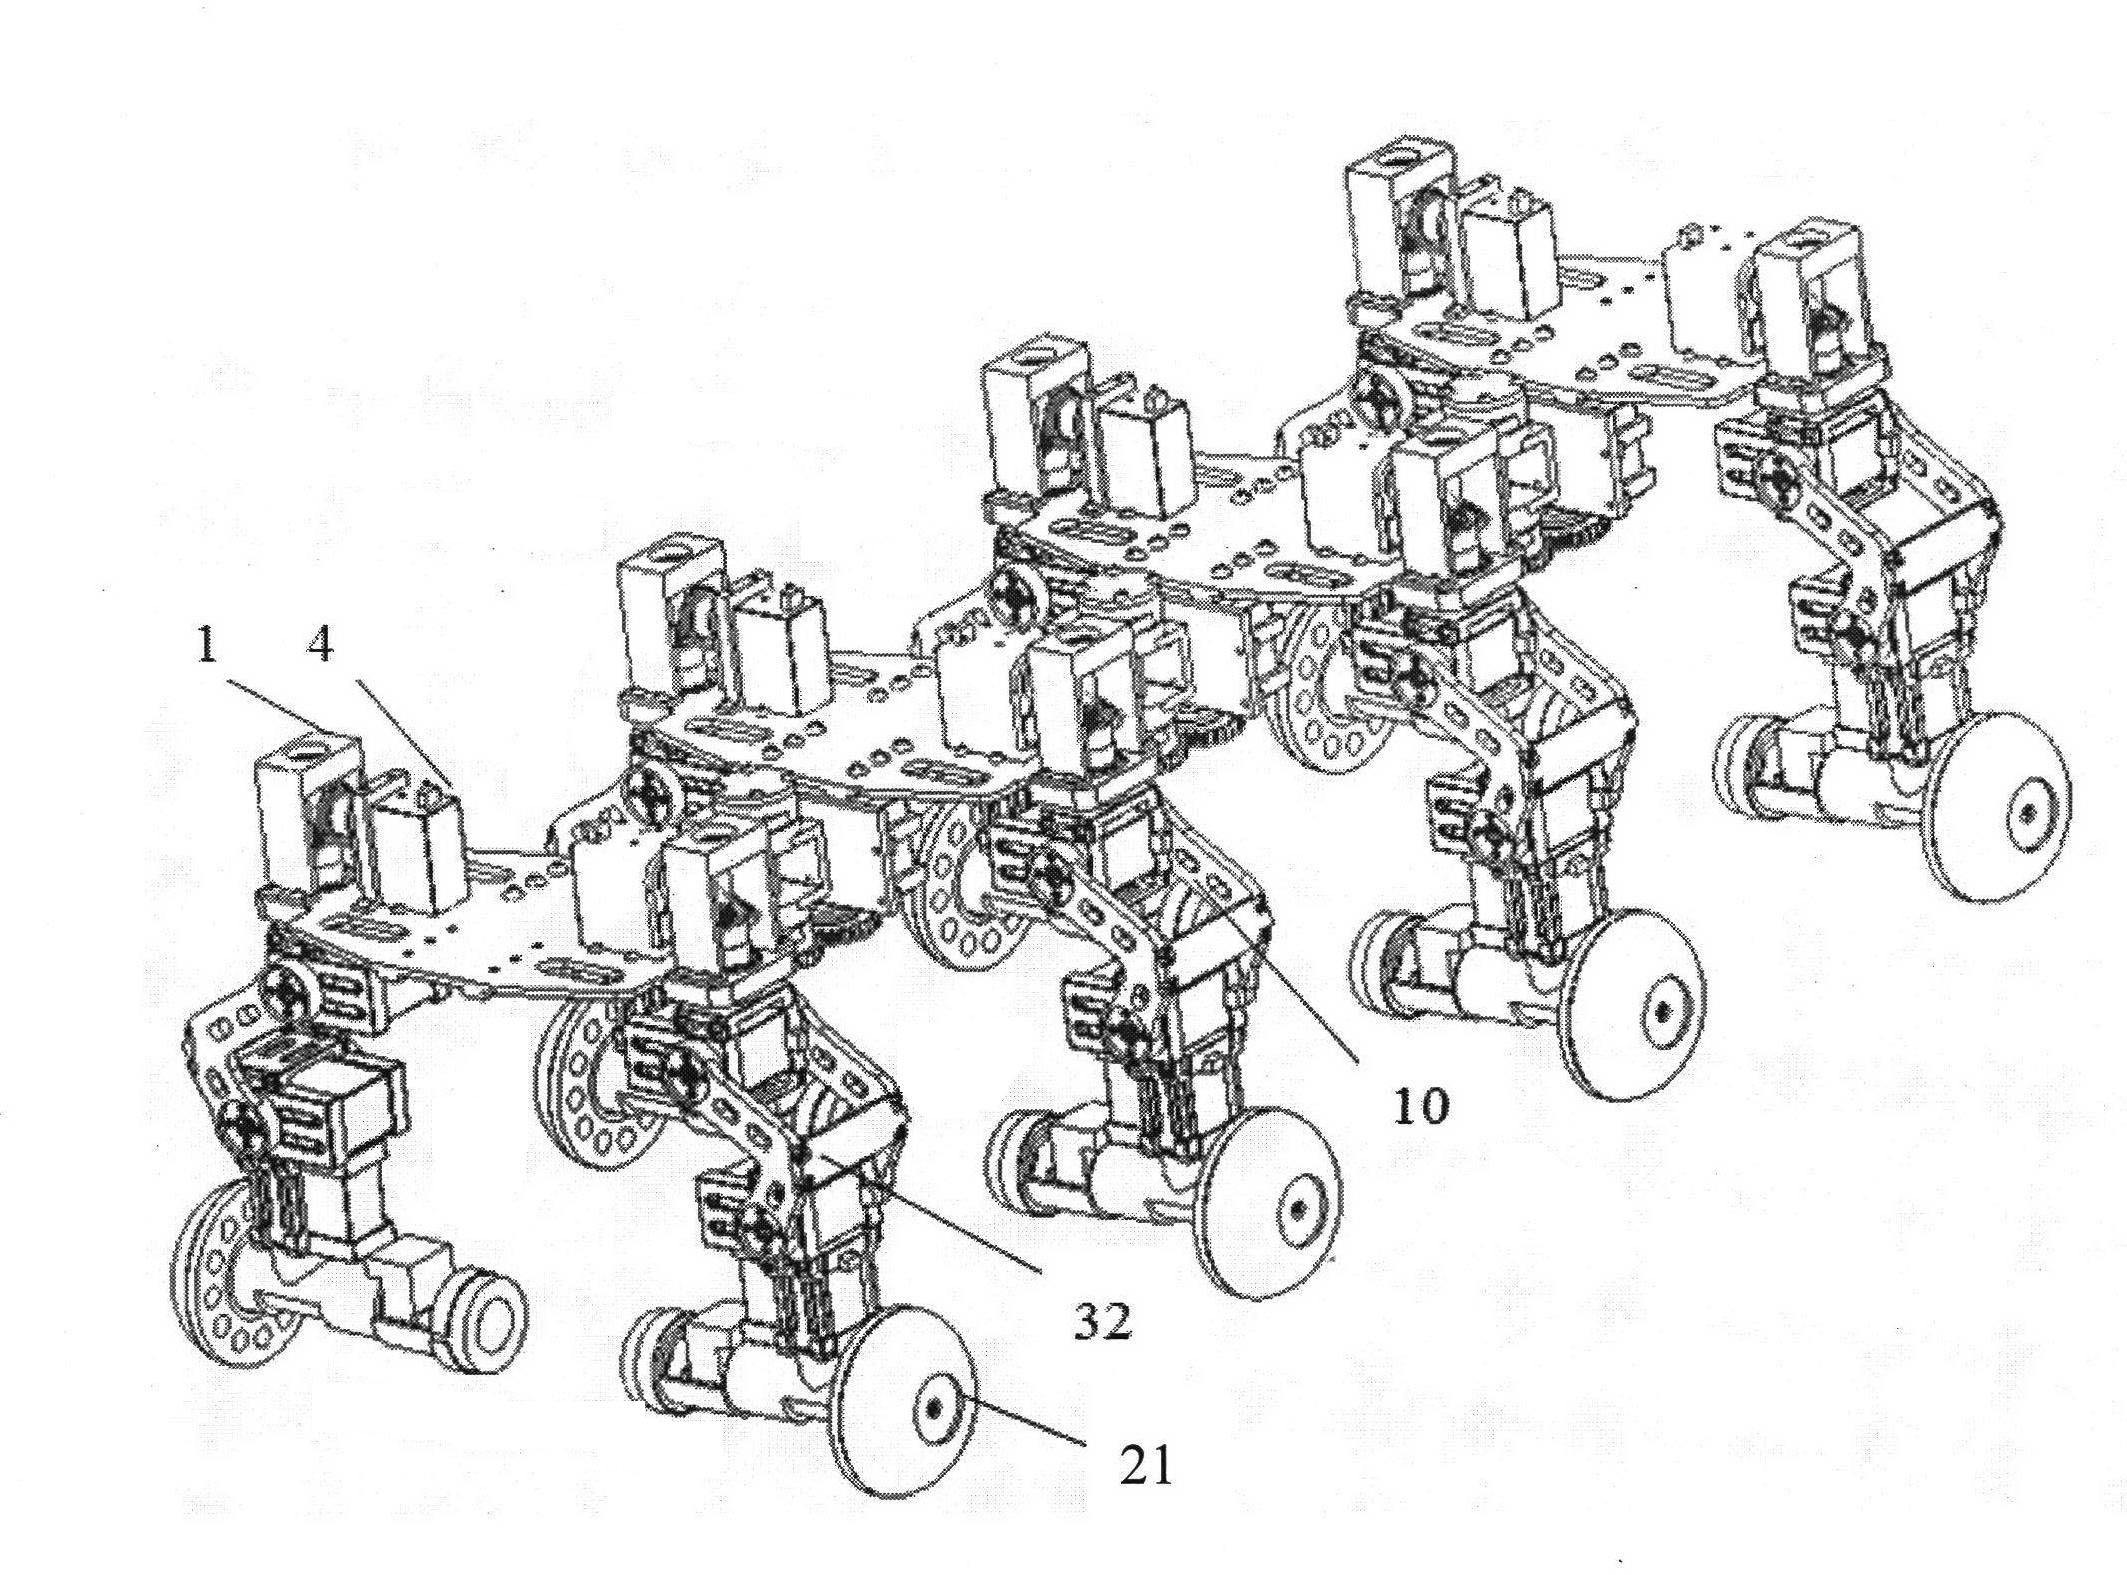 Multi-joint chain link-type robot based on modularization